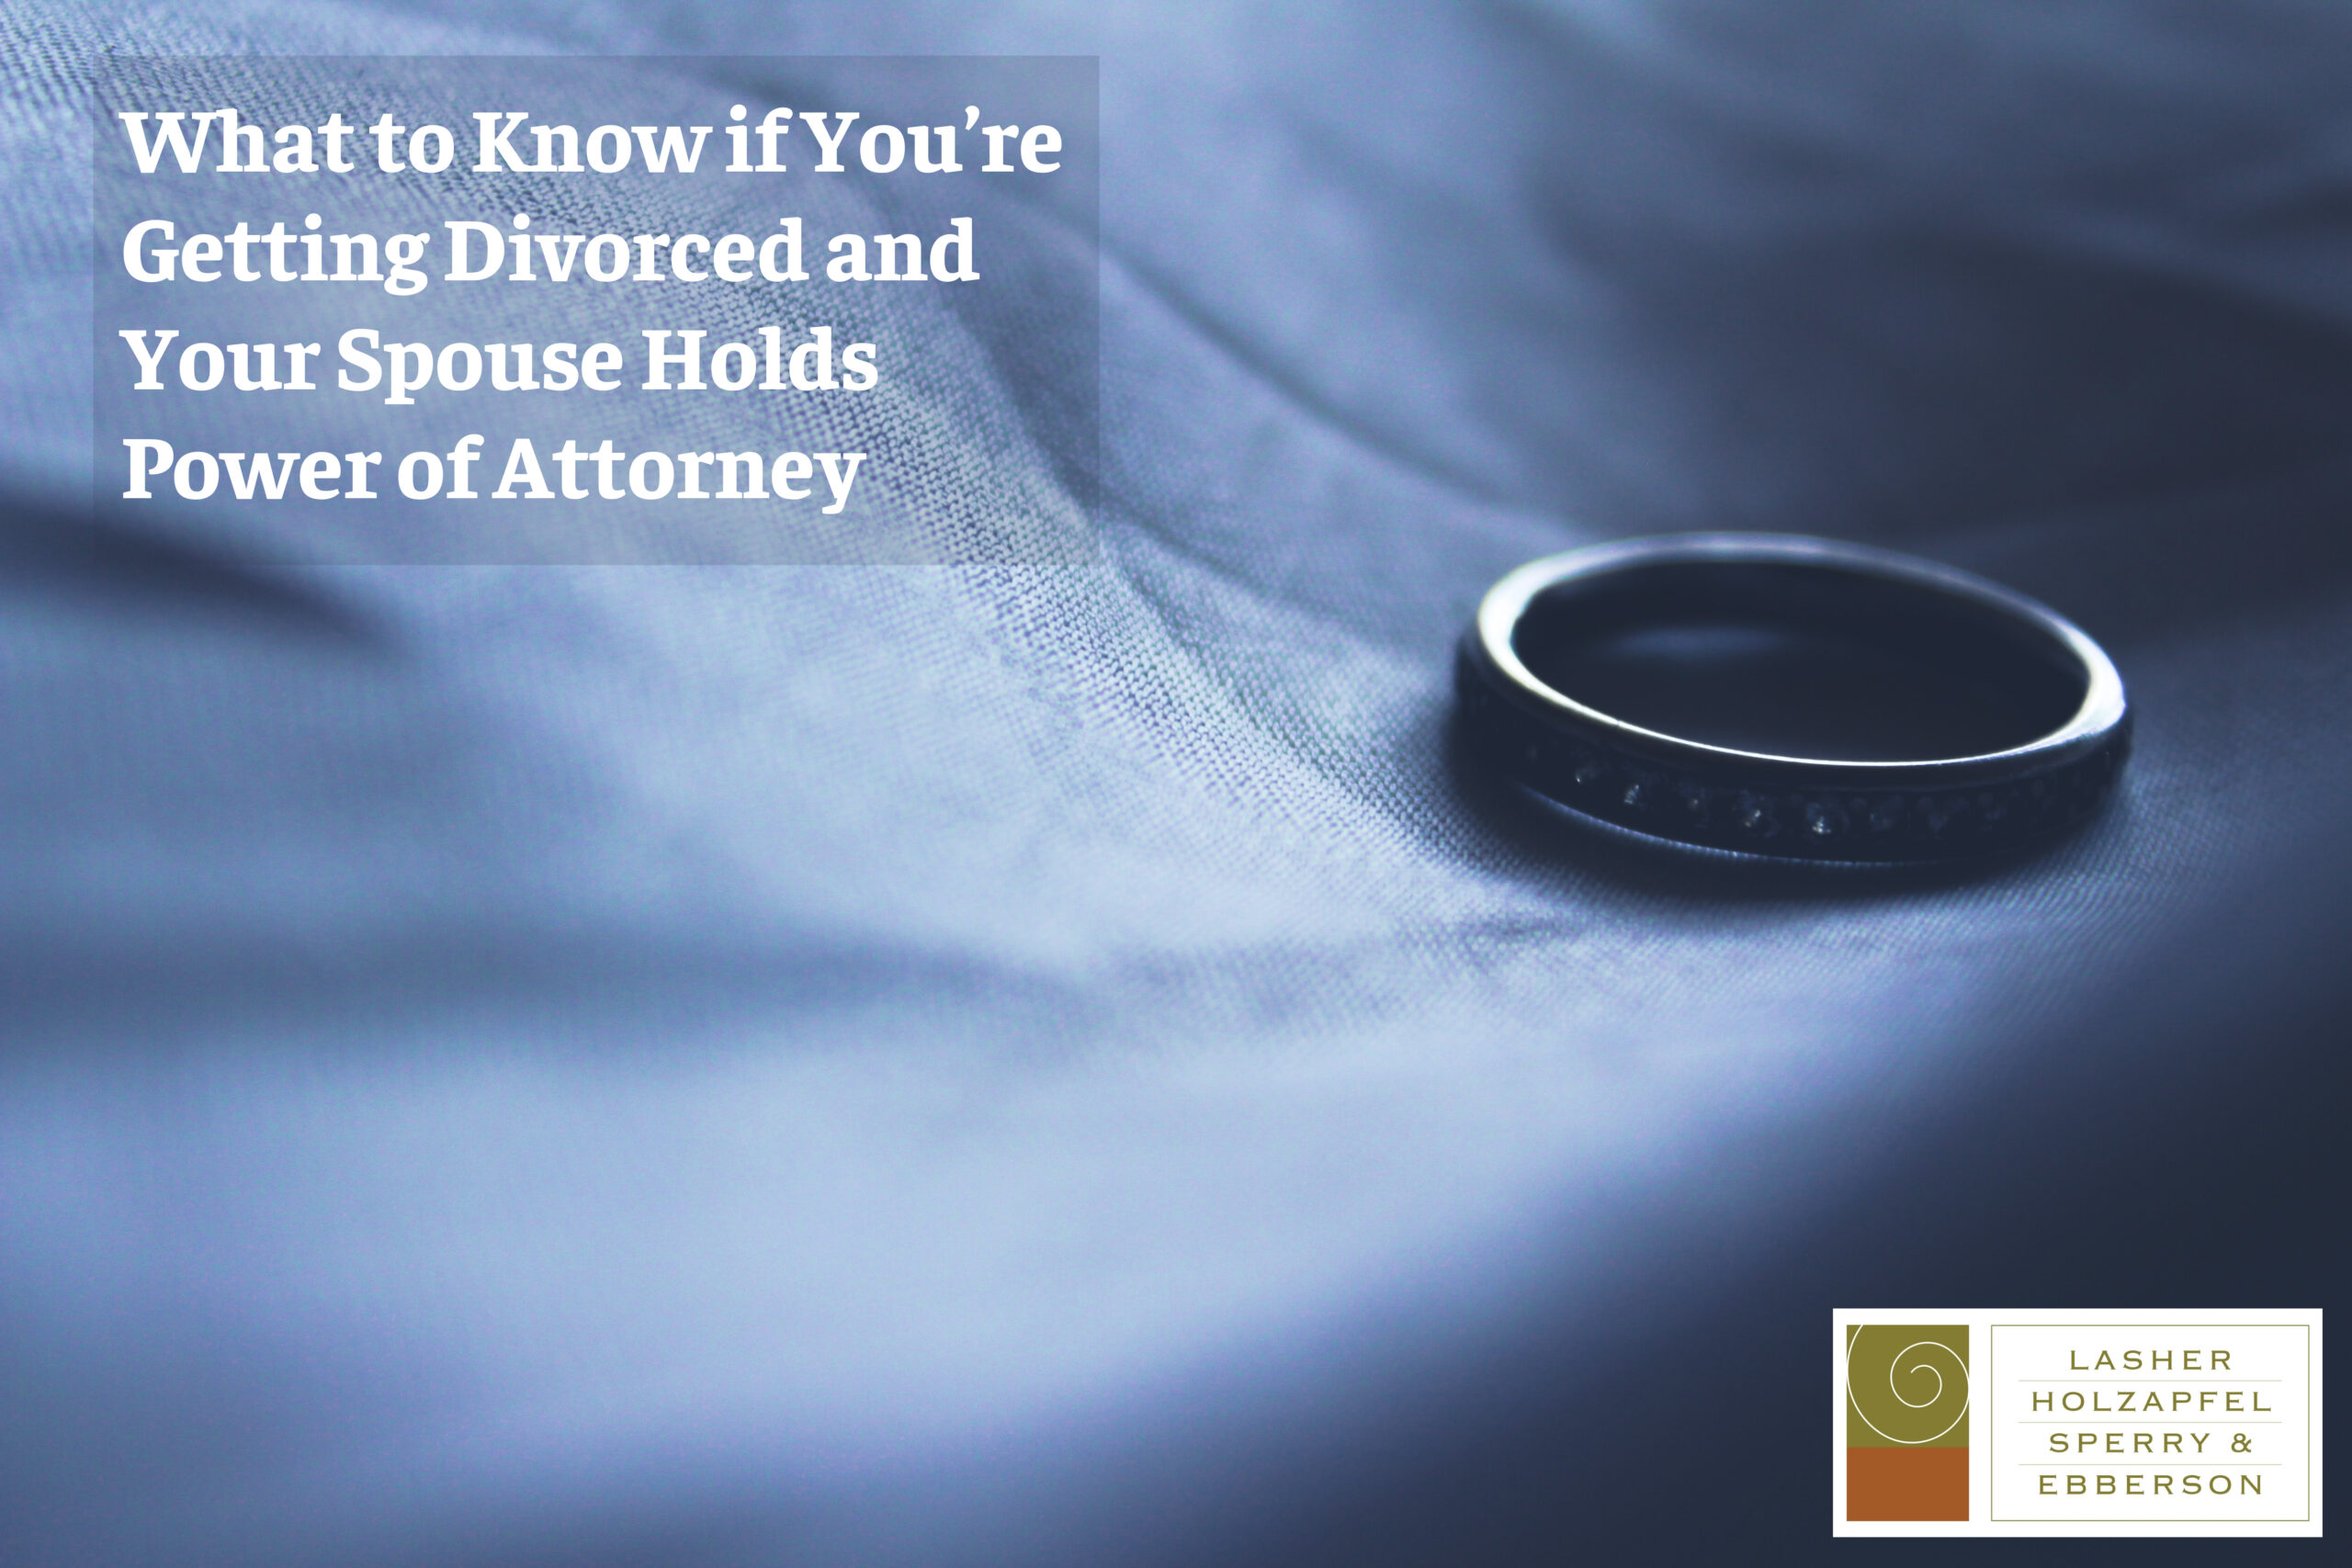 What to Know if You’re Getting Divorced and Your Spouse Holds Power of Attorney